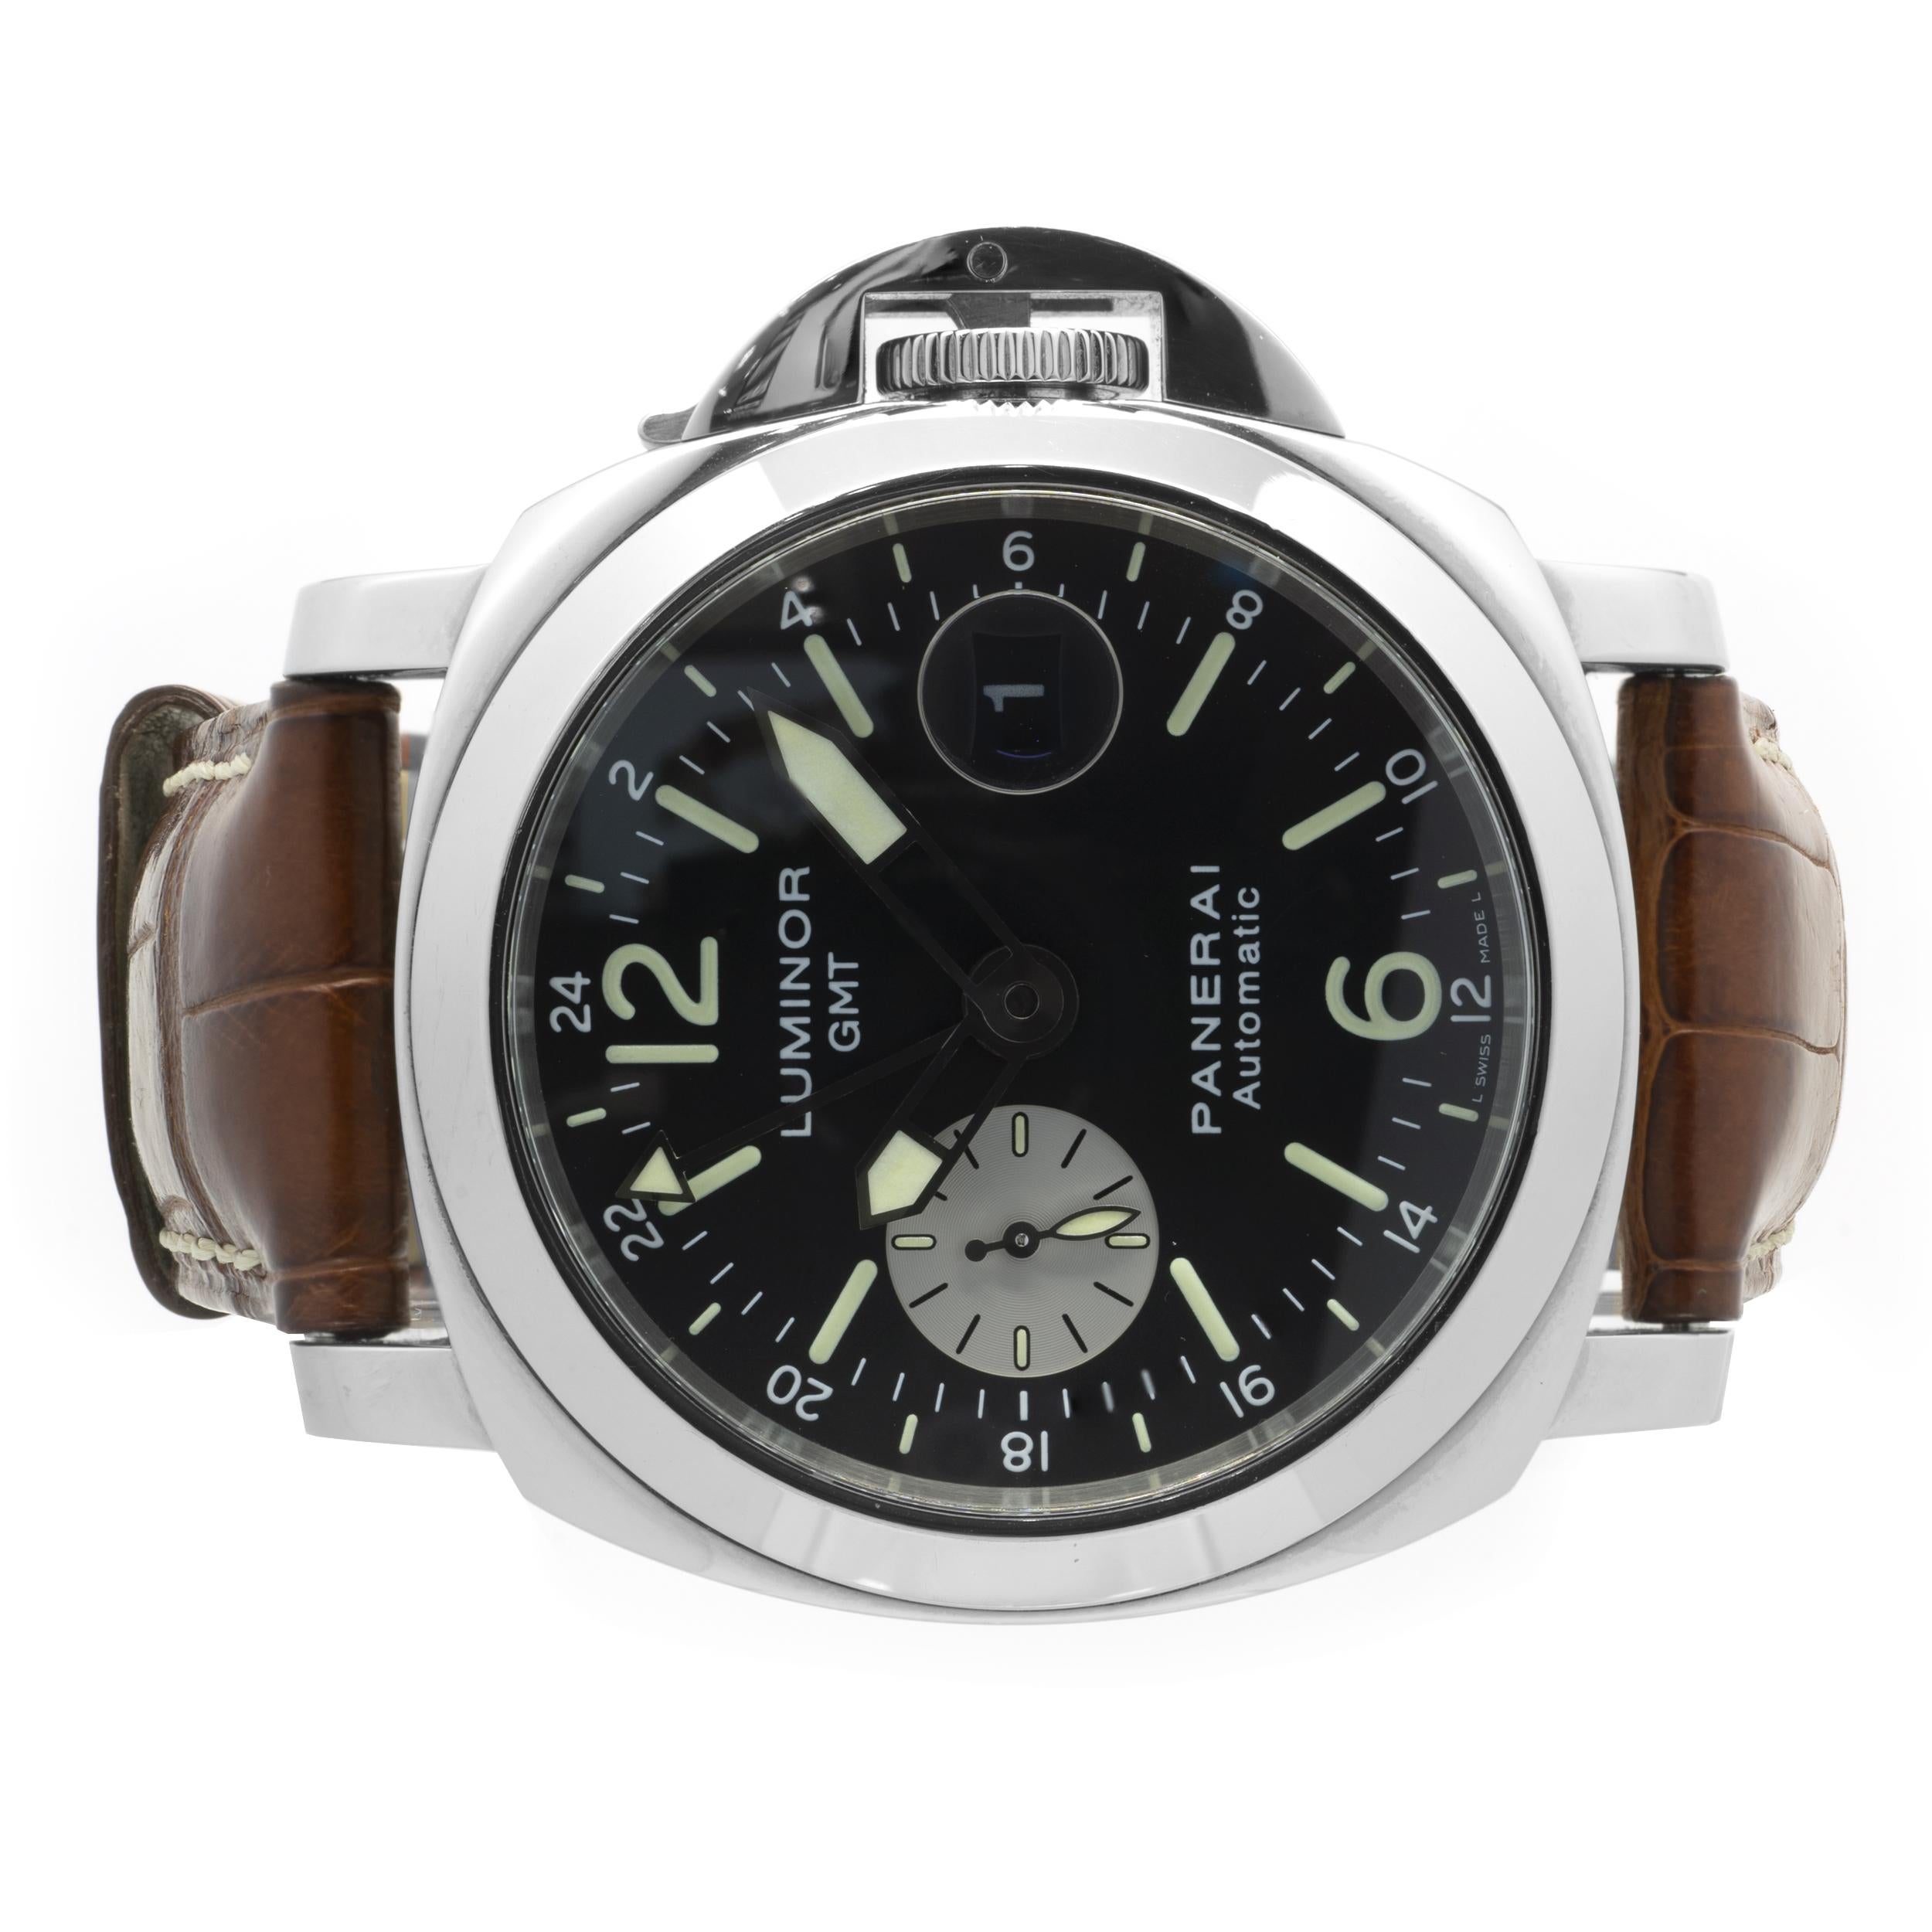 Movement: automatic
Function: Hours, minutes, seconds, date, GMT
Case: 44mm stainless steel case, sapphire crystal, smooth bezel, push-pull crown
Band: Panerai brown aligator strap with deployment clasp
Dial: black arabic/stick GMT dial
Reference: